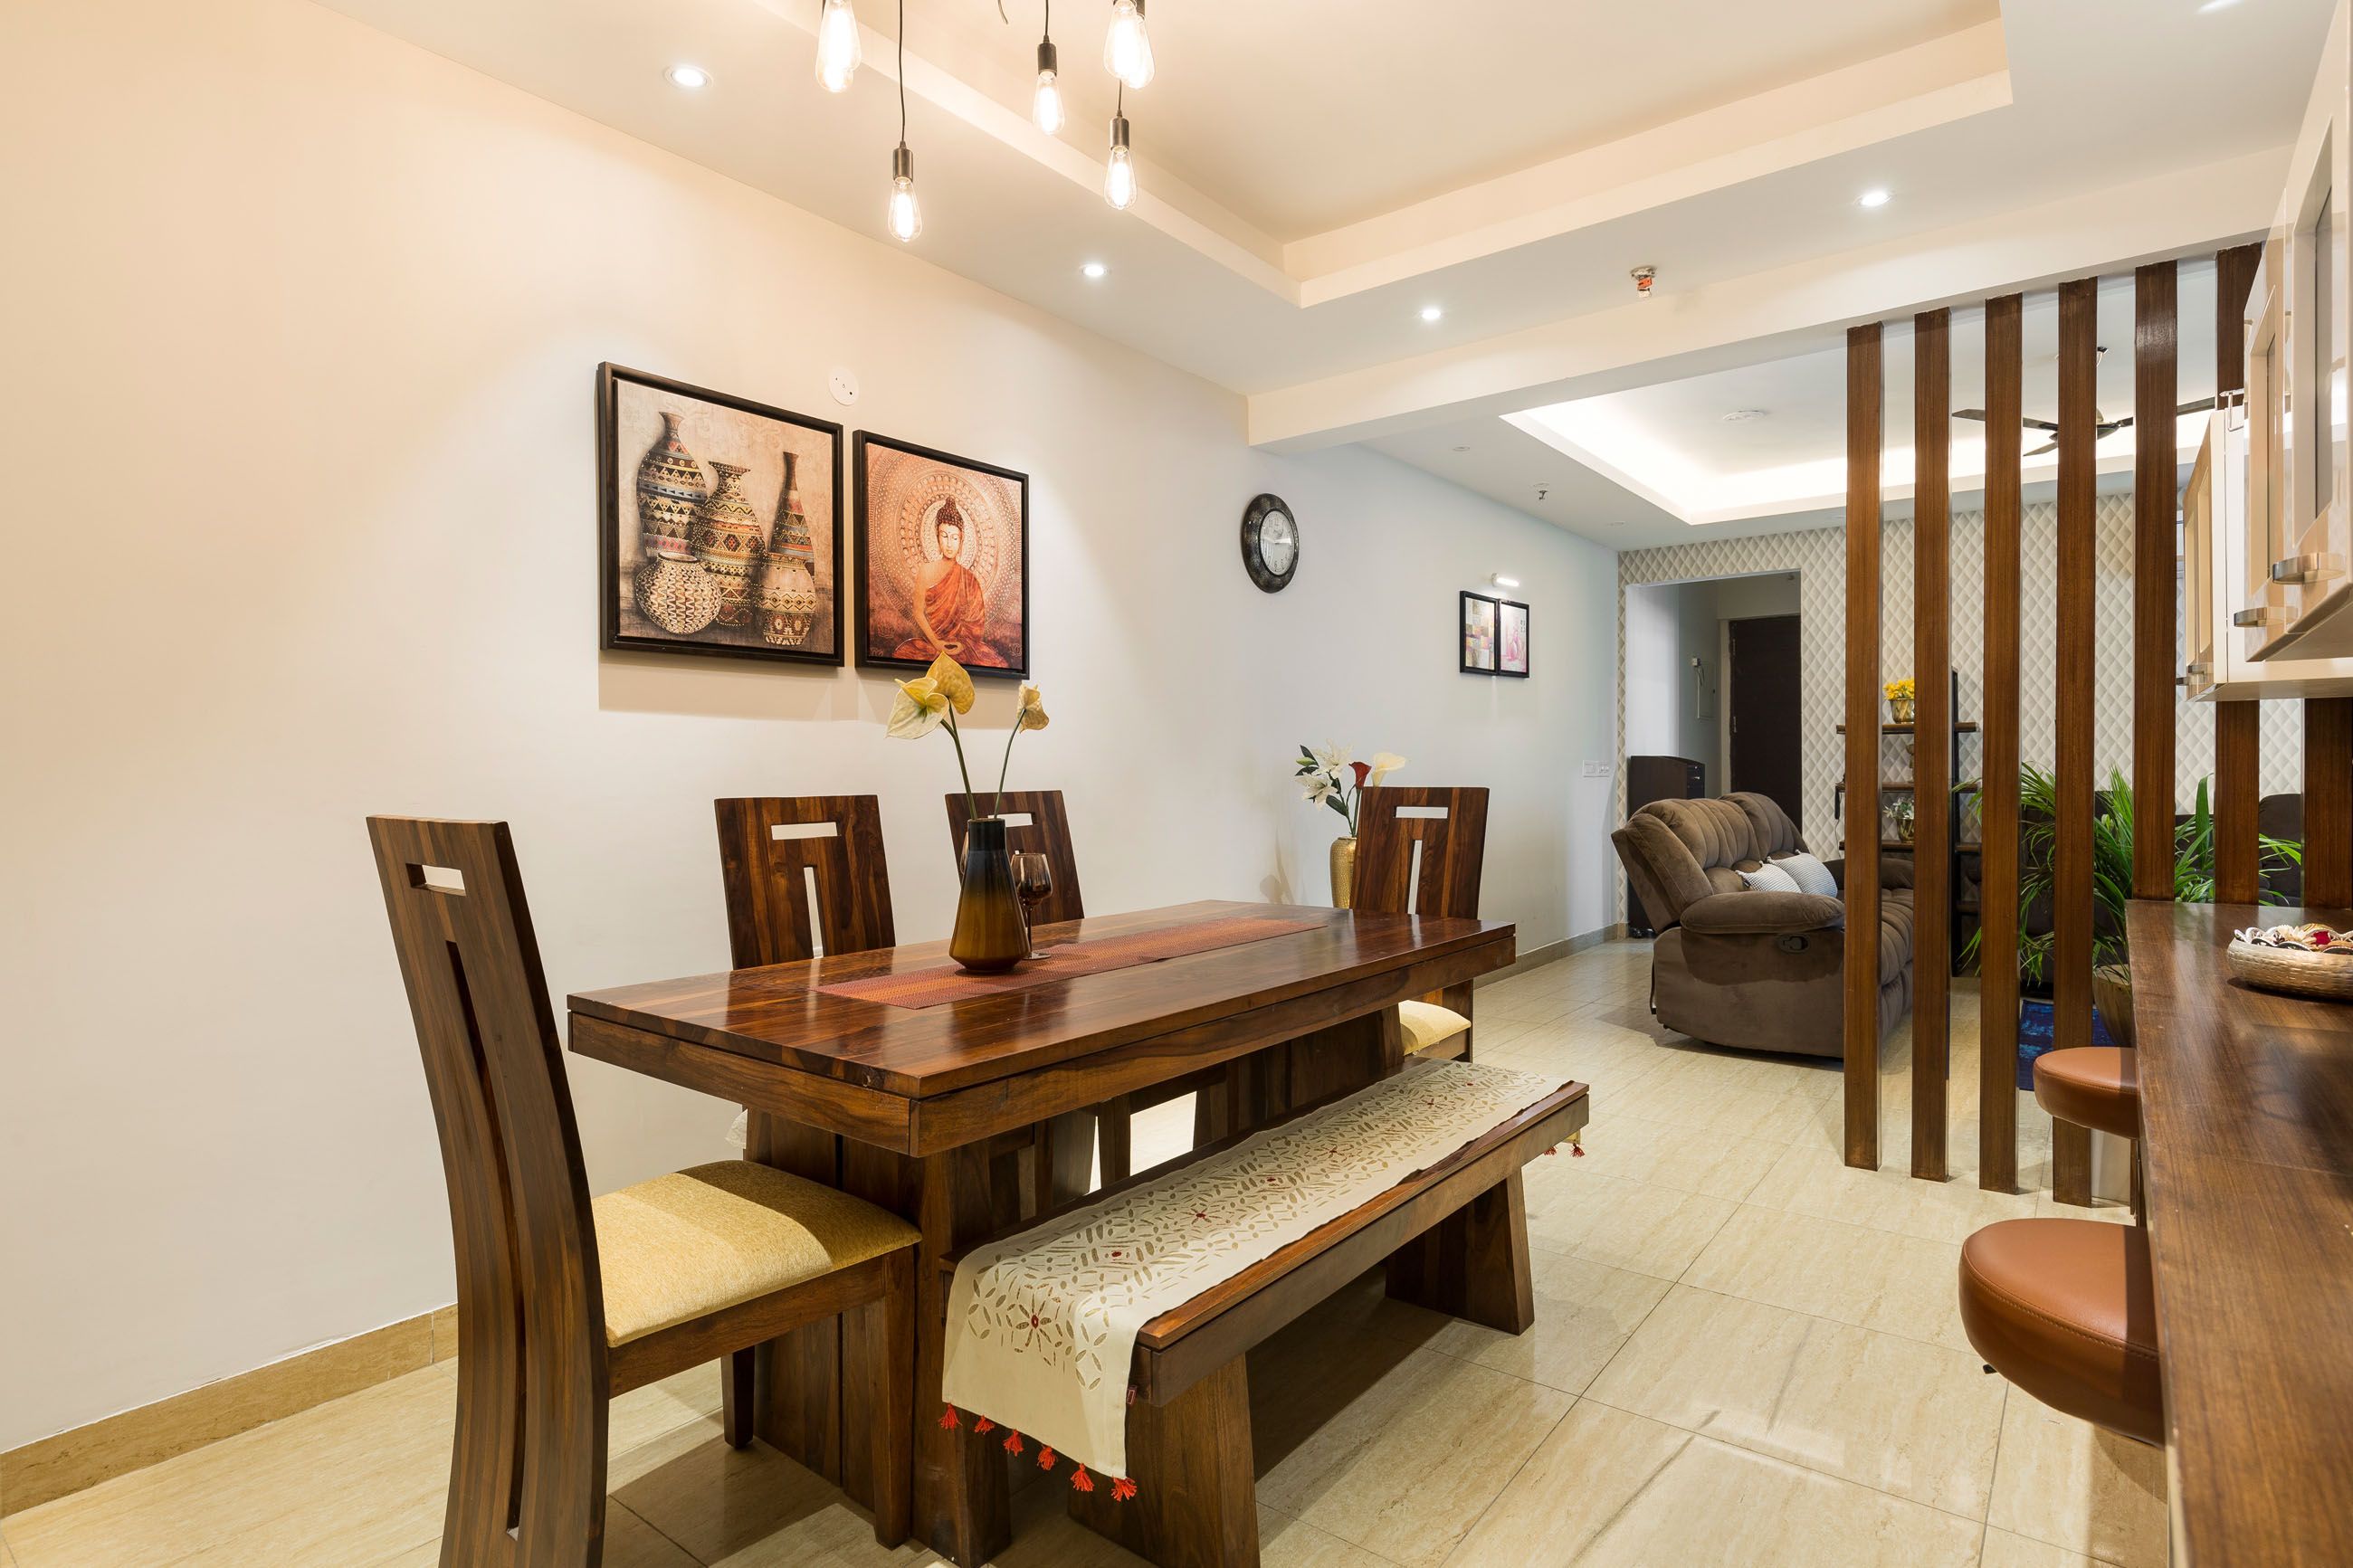 Contemporary Dining Room Design With A 6-Seater Wooden Table